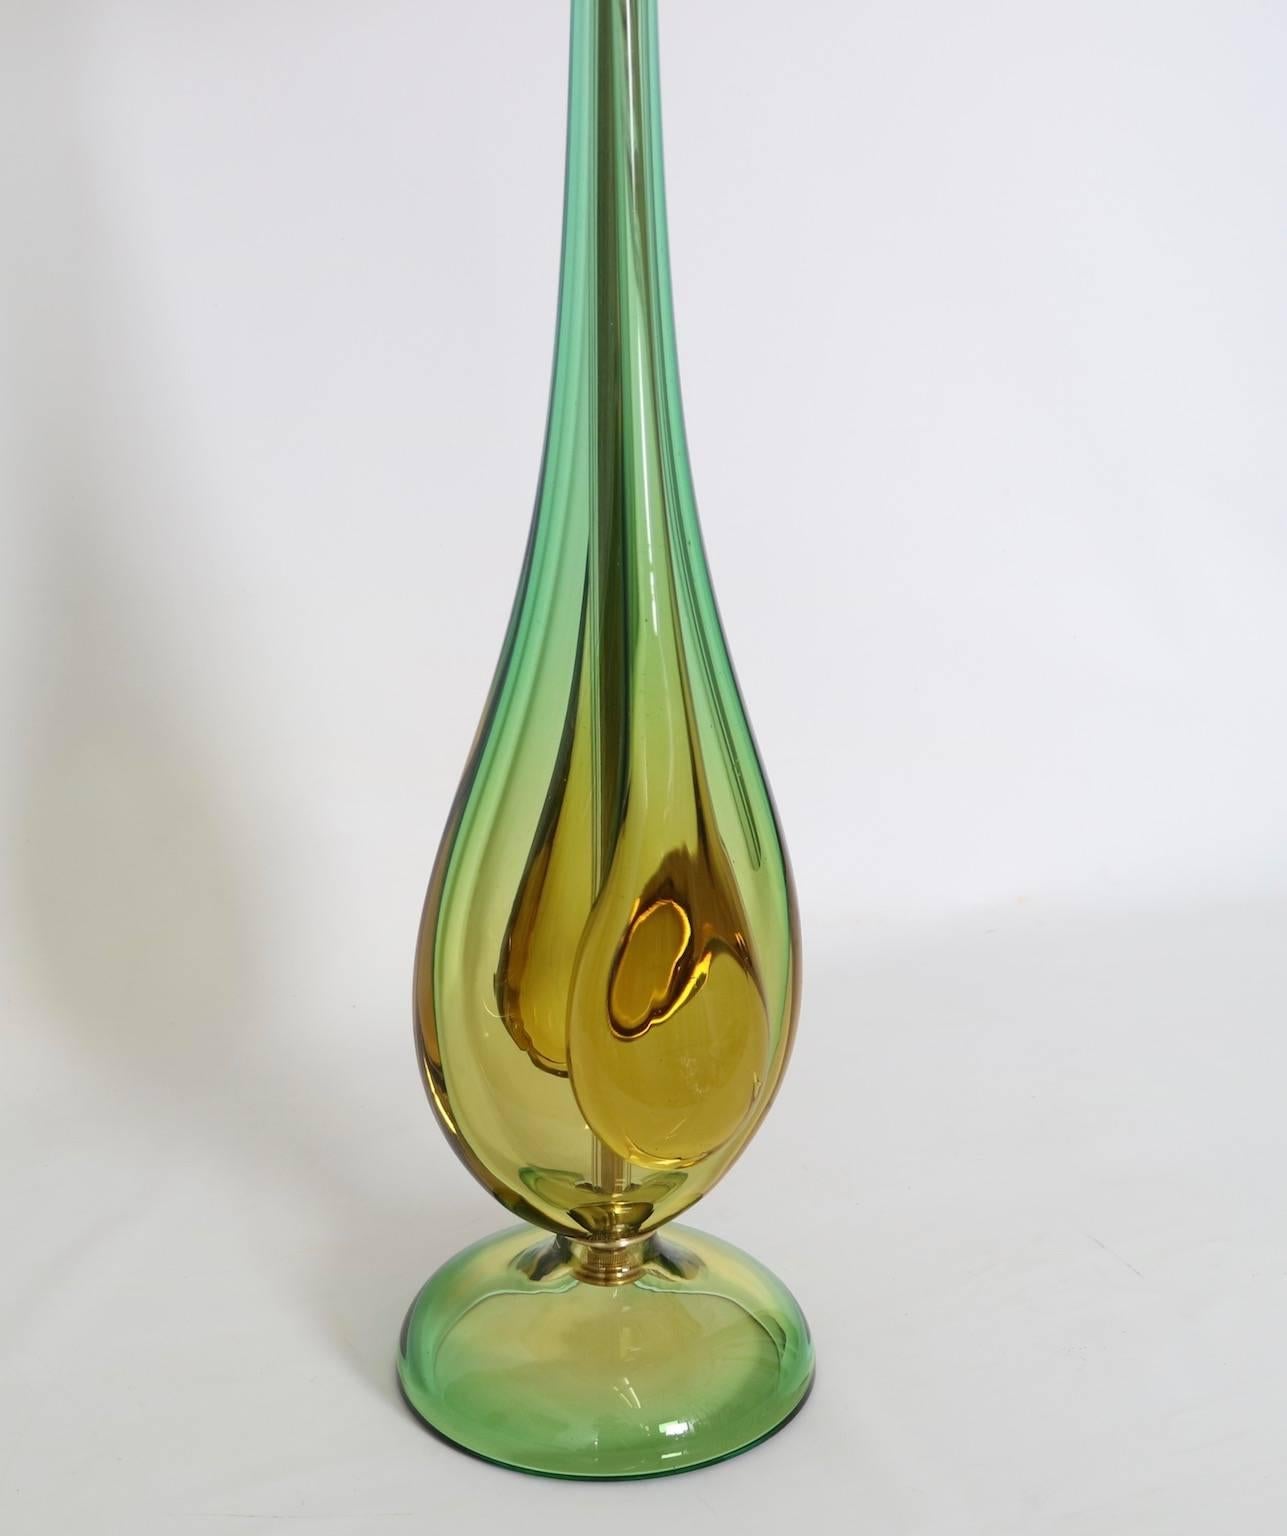 Italian Murano Sommerso glass lamp by Seguso in green and amber. This midcentury lamp is fully restored and has all new wiring and hardware, including a double socket cluster. This lamp is in excellent vintage condition and has wear consistent with